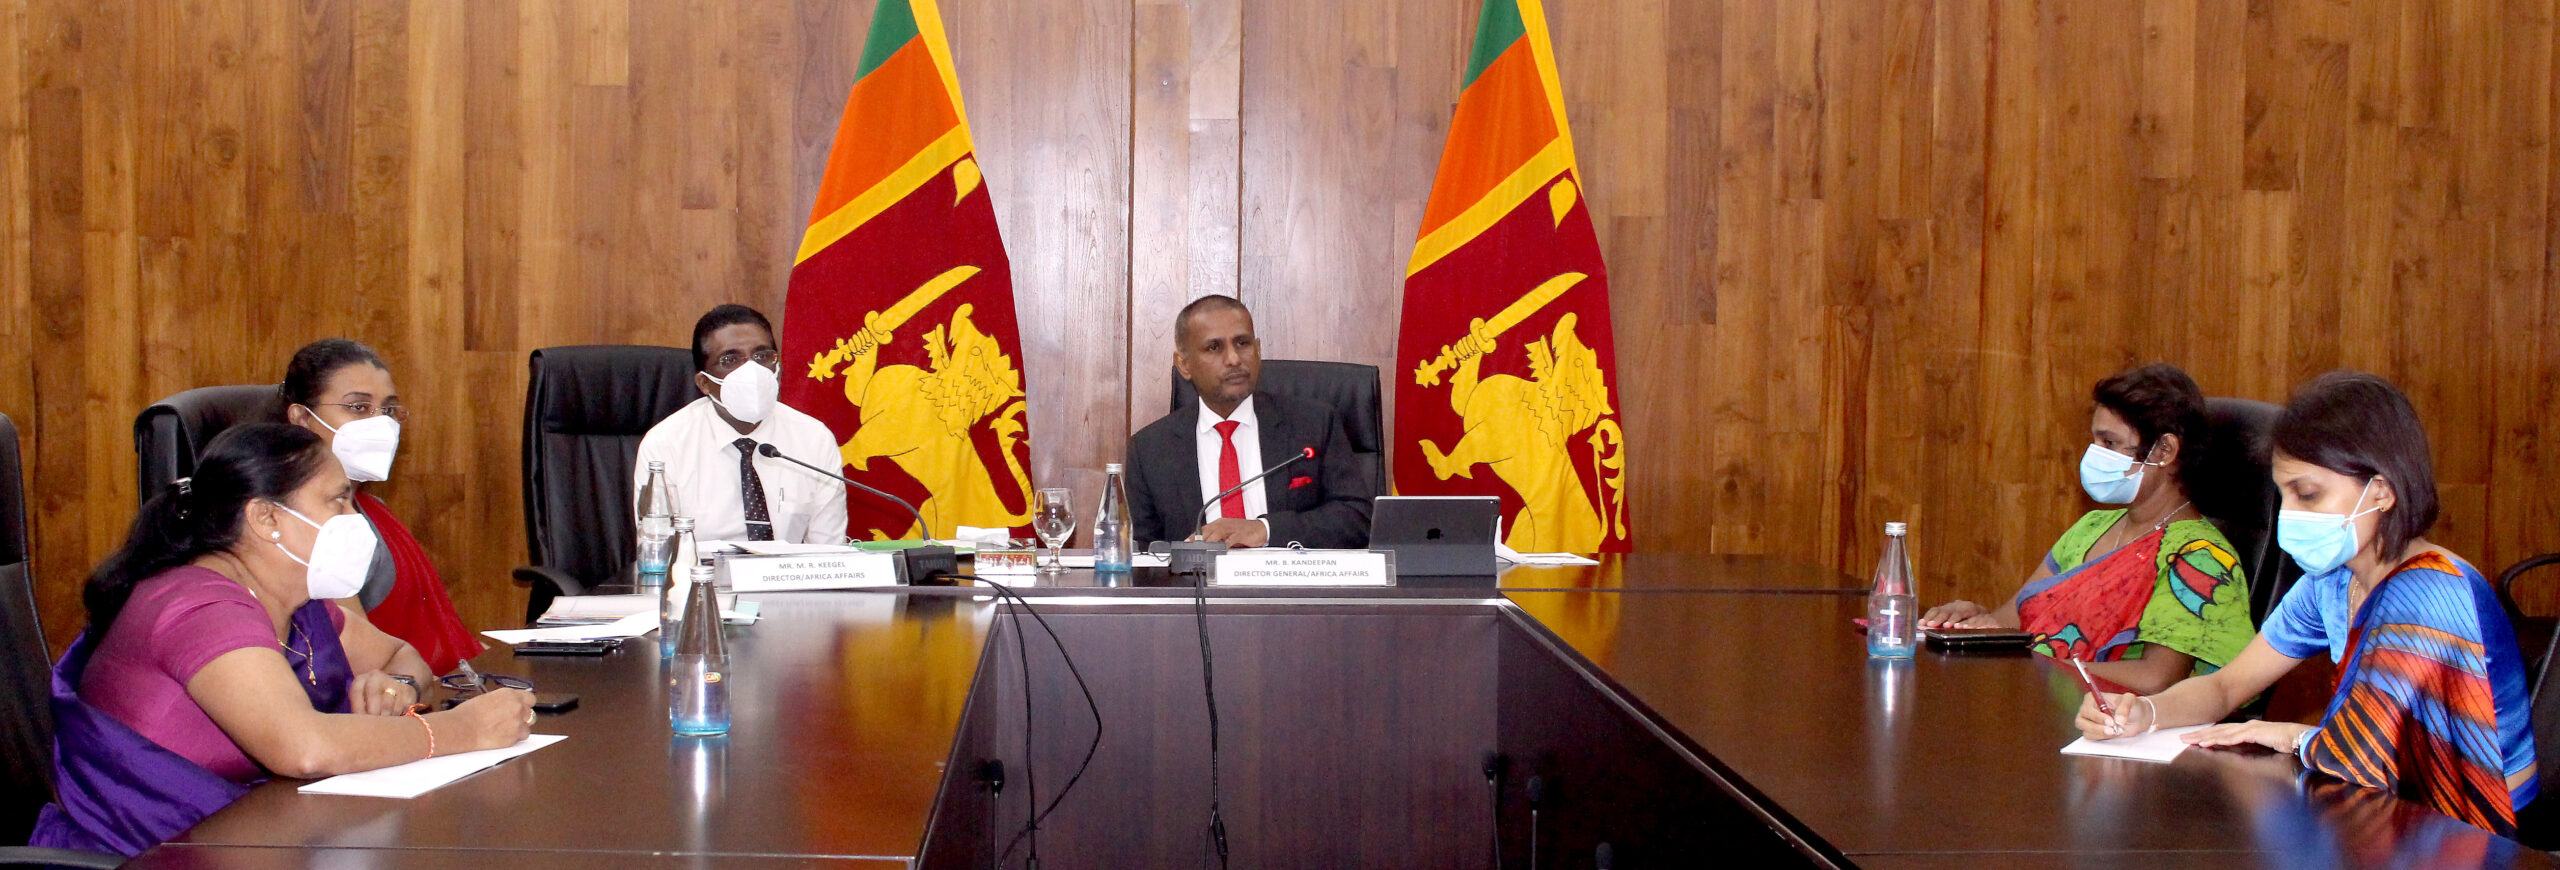 Sri Lanka and Ethiopia discuss enhancement of political and economic ties at first ever bilateral consultations